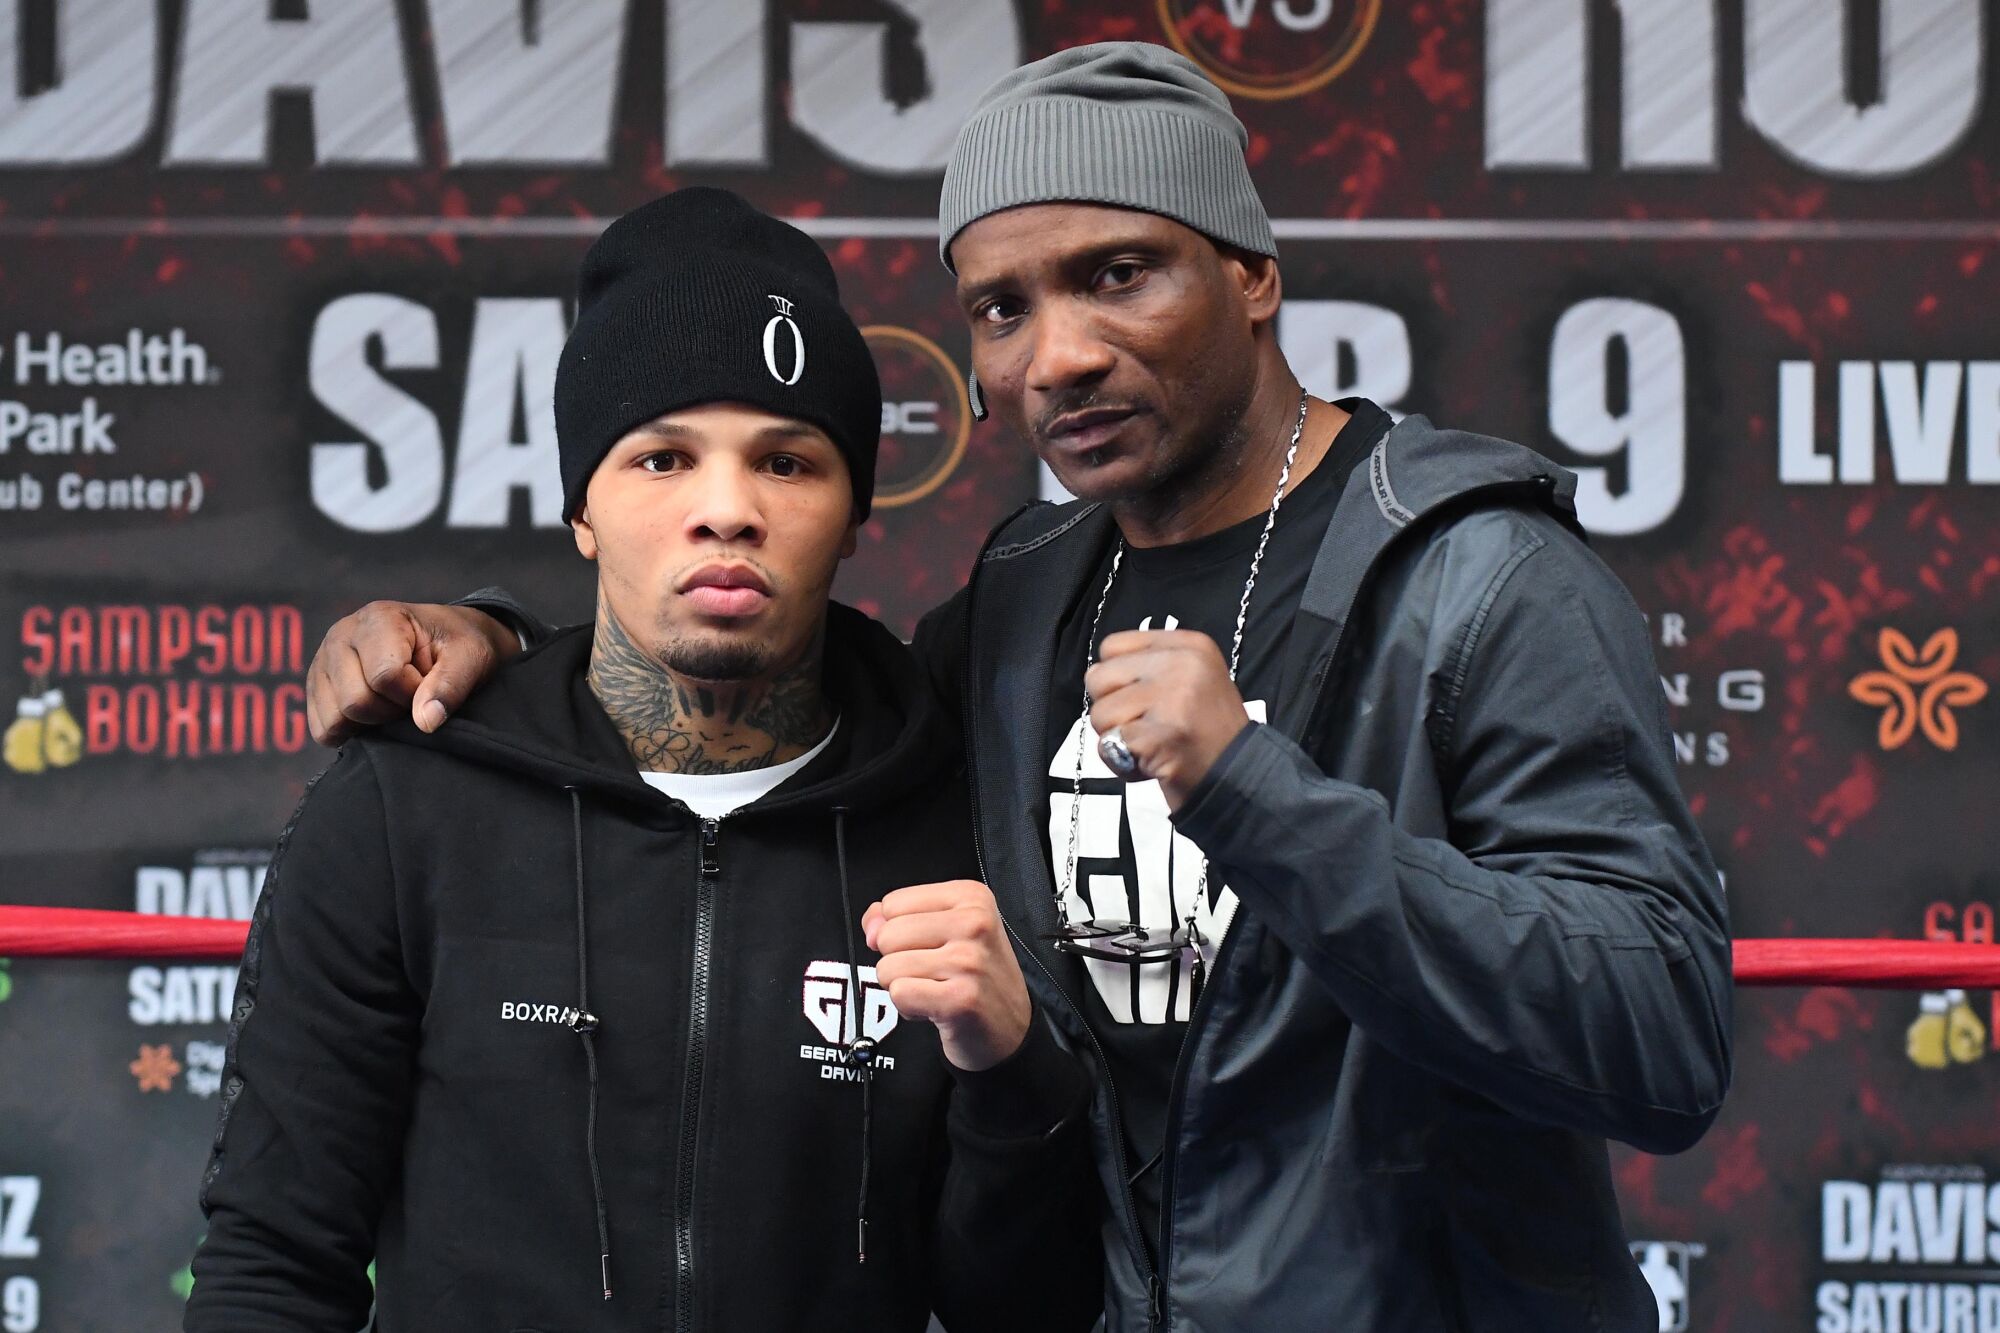 Gervonta Davis and trainer Calvin Ford pose for a photo at Churchill Boxing Club in Los Angeles.